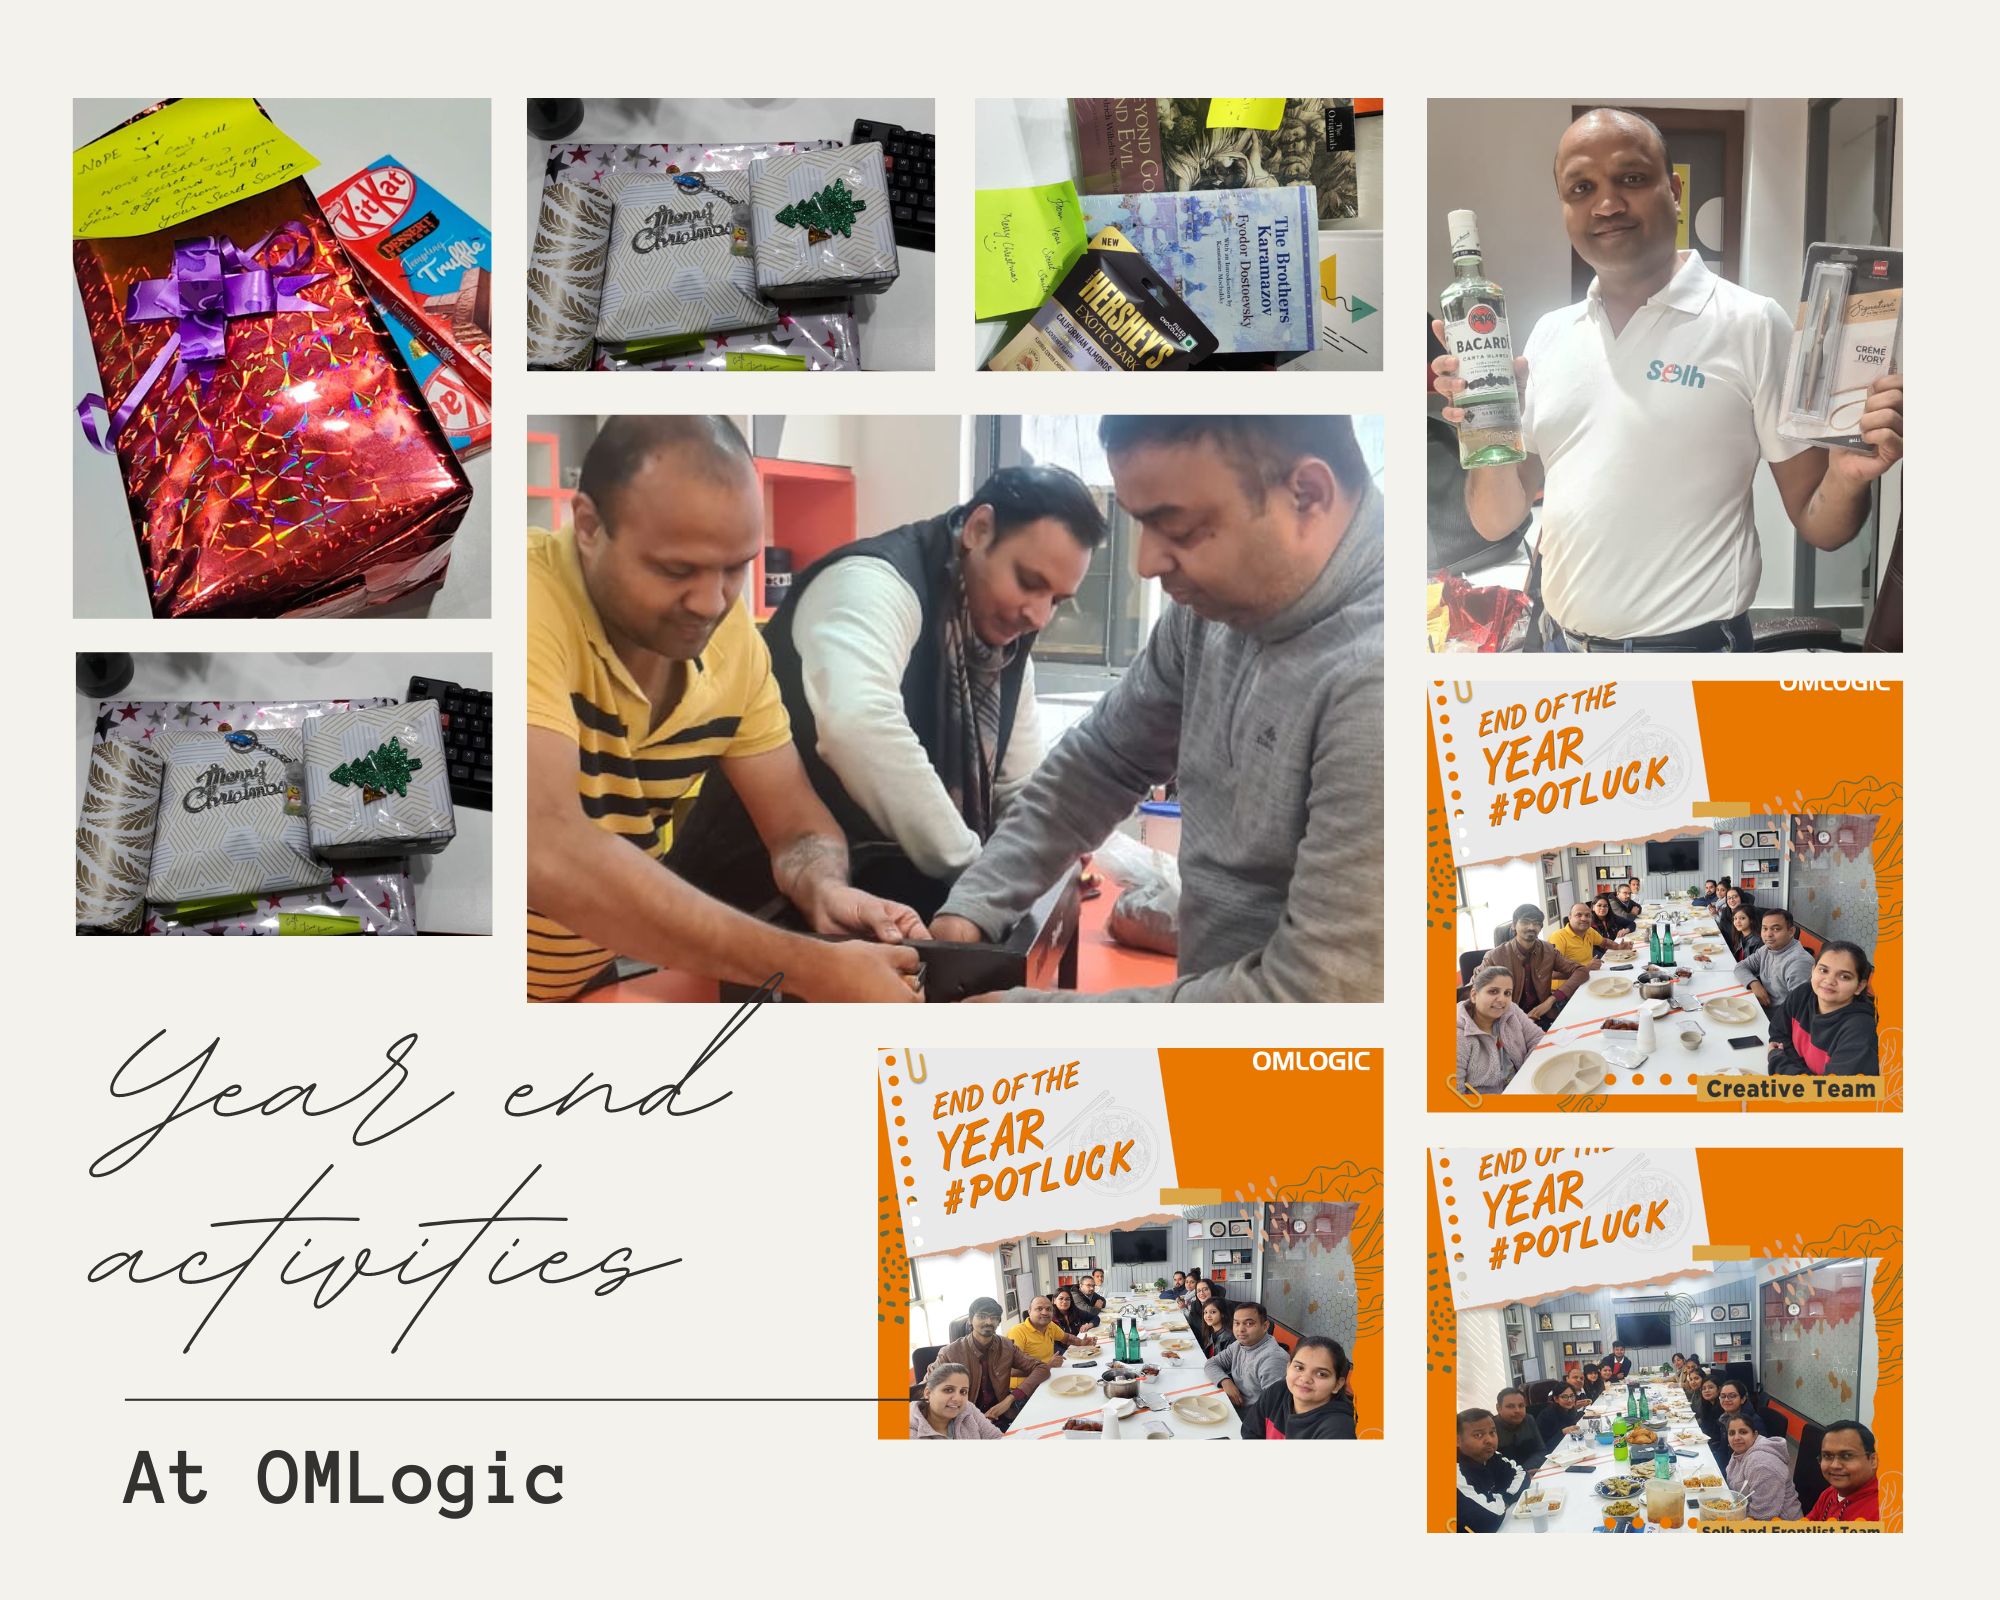 We at OMLOGIC relentlessly seek ways to improve our work culture and environment to ensure that every employee feels like they can learn and grow altogether.